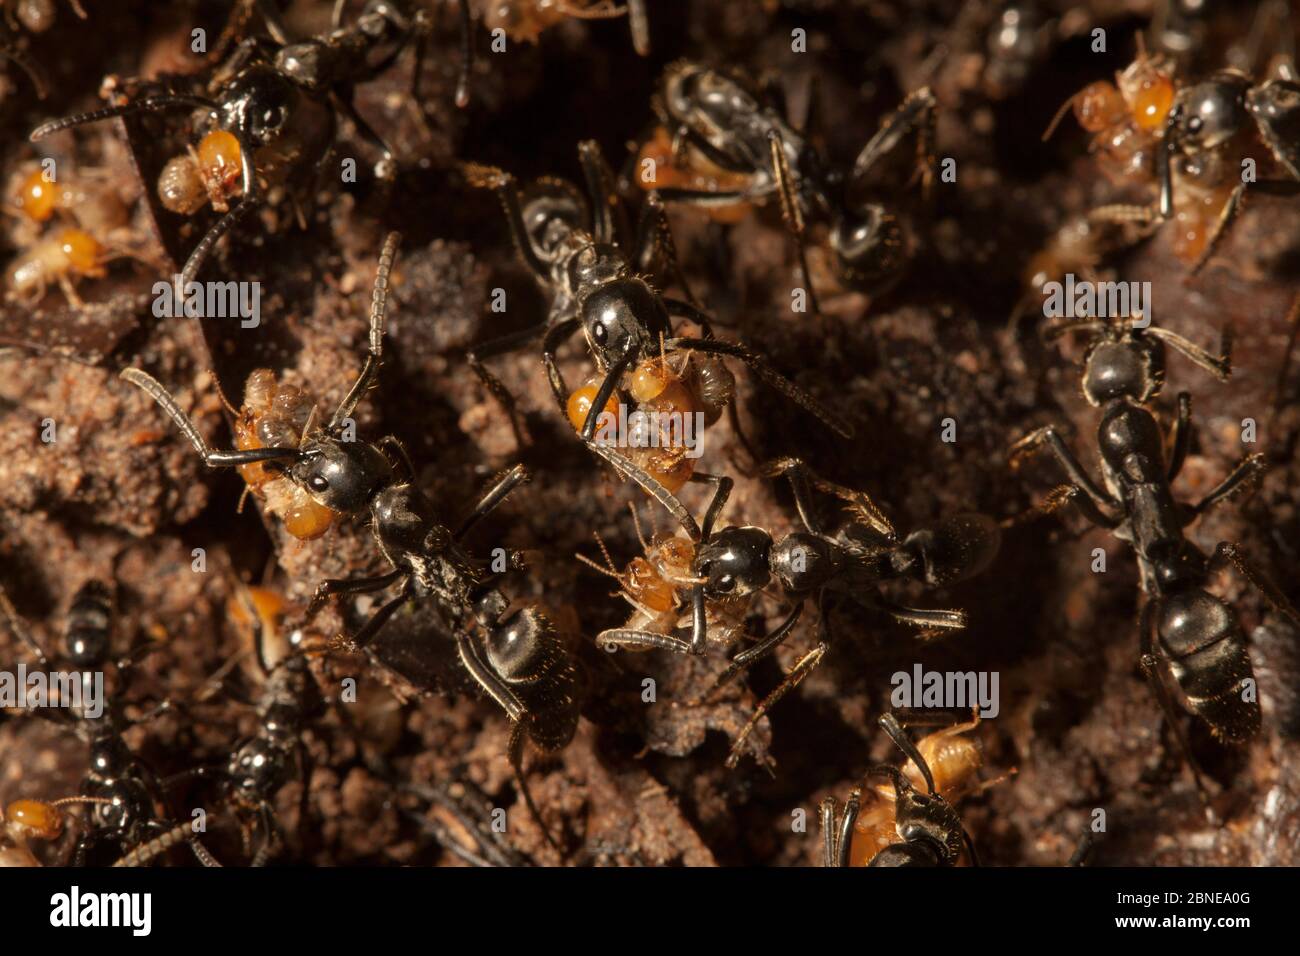 Ants (Formicidae) attacking a Termite colony, Lake Lobak / Lobeke National Park, South East Cameroon, July. Stock Photo